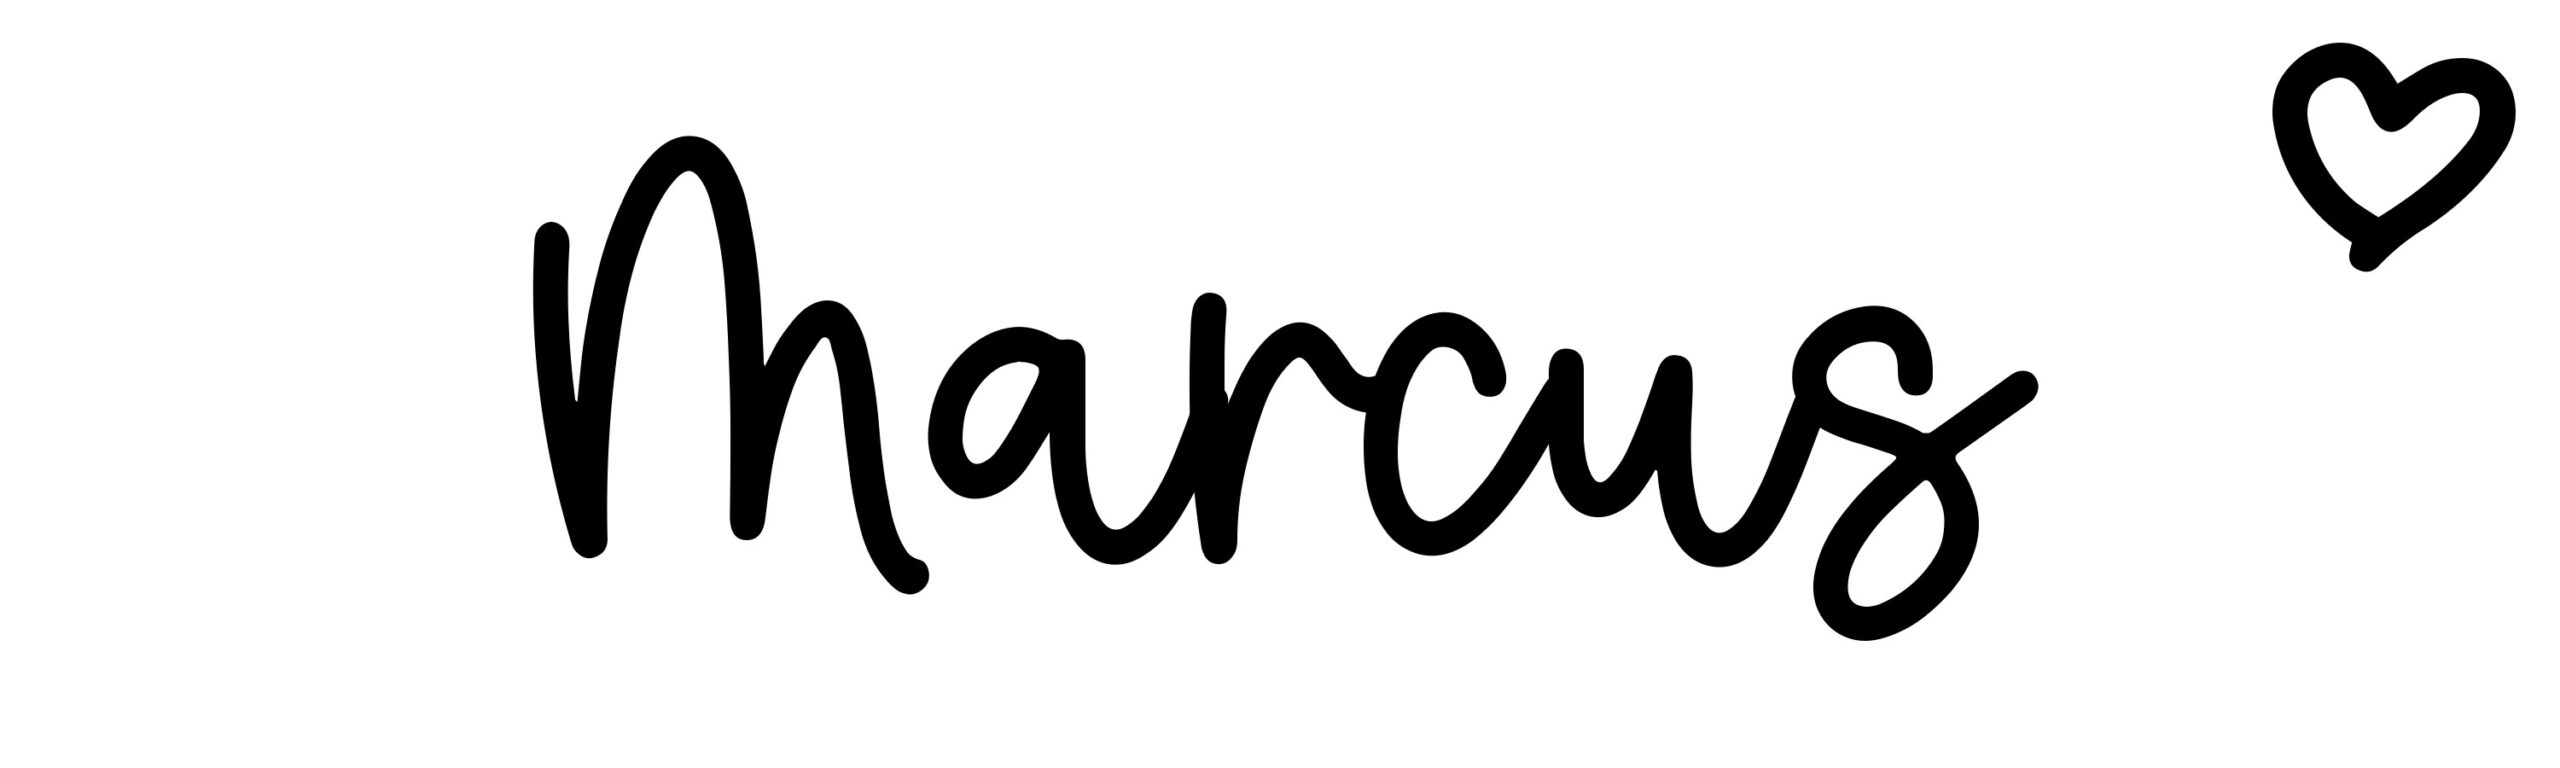 Marcus - Name meaning, origin, variations and more